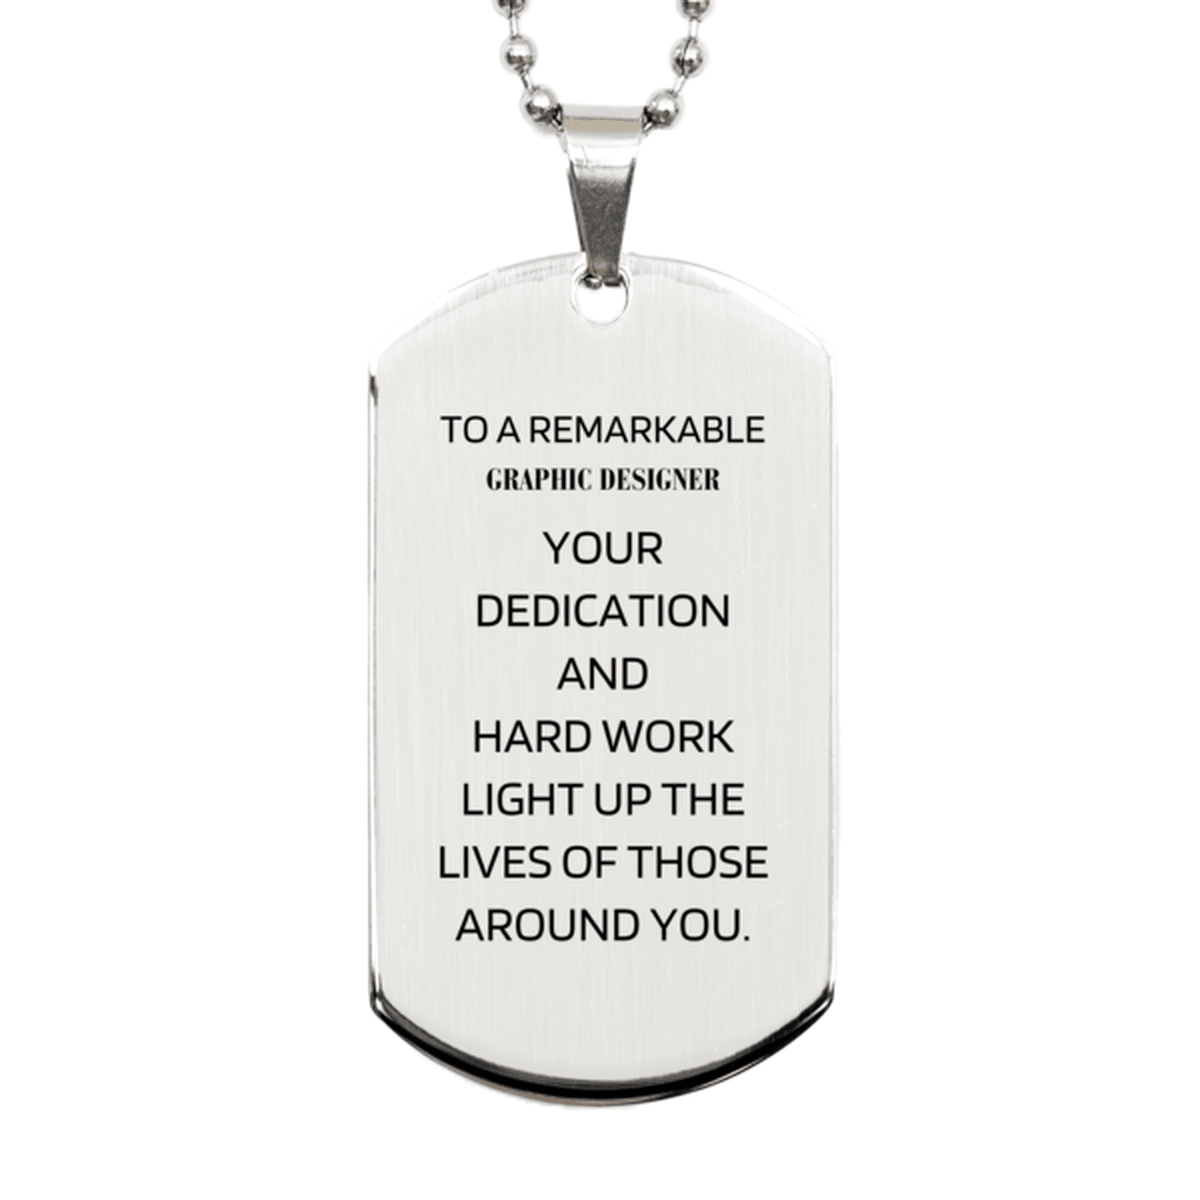 Remarkable Graphic Designer Gifts, Your dedication and hard work, Inspirational Birthday Christmas Unique Silver Dog Tag For Graphic Designer, Coworkers, Men, Women, Friends - Mallard Moon Gift Shop